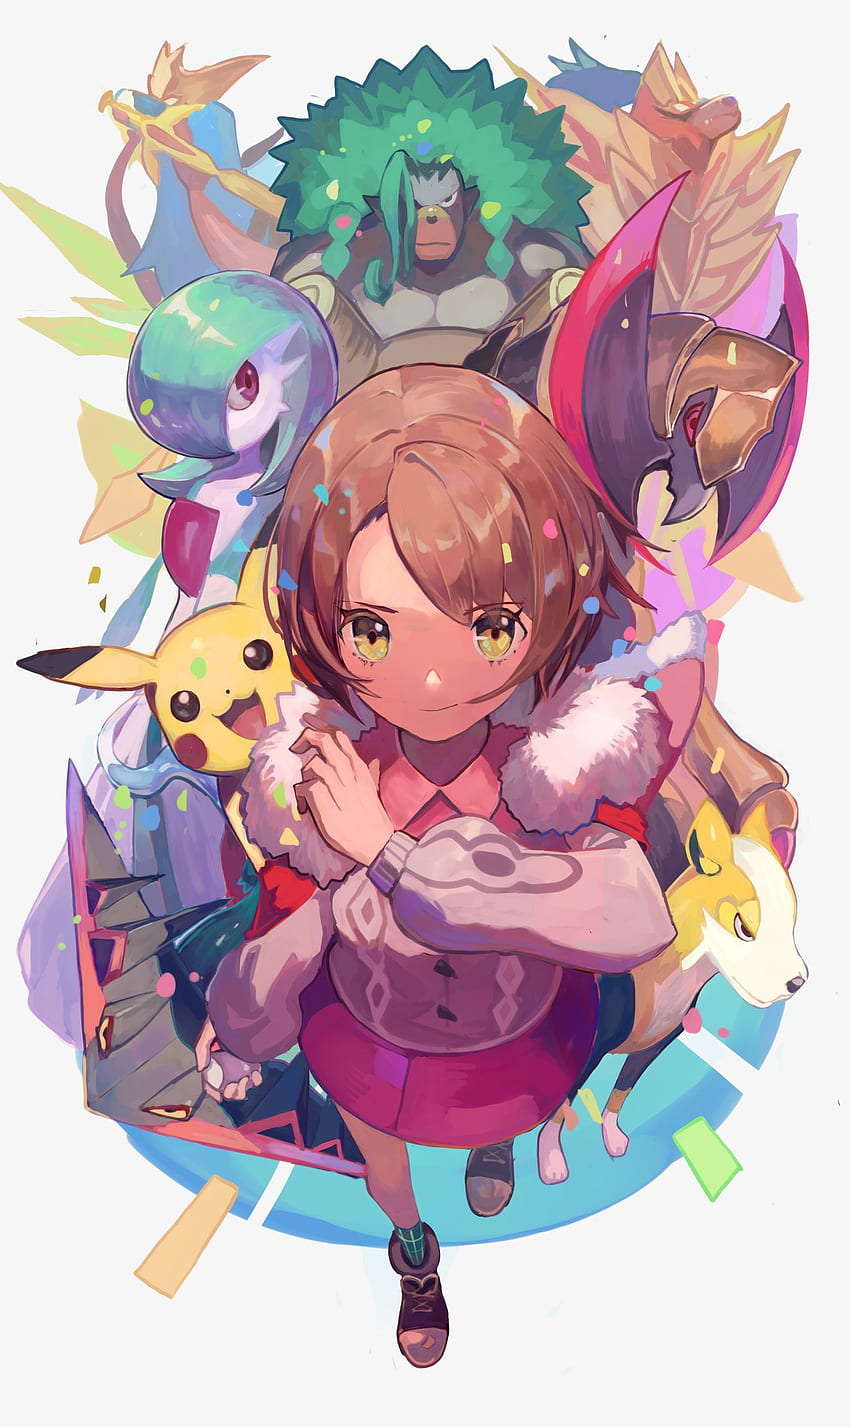 Pokémon: Sword and Shield Phone Wallpaper - Mobile Abyss